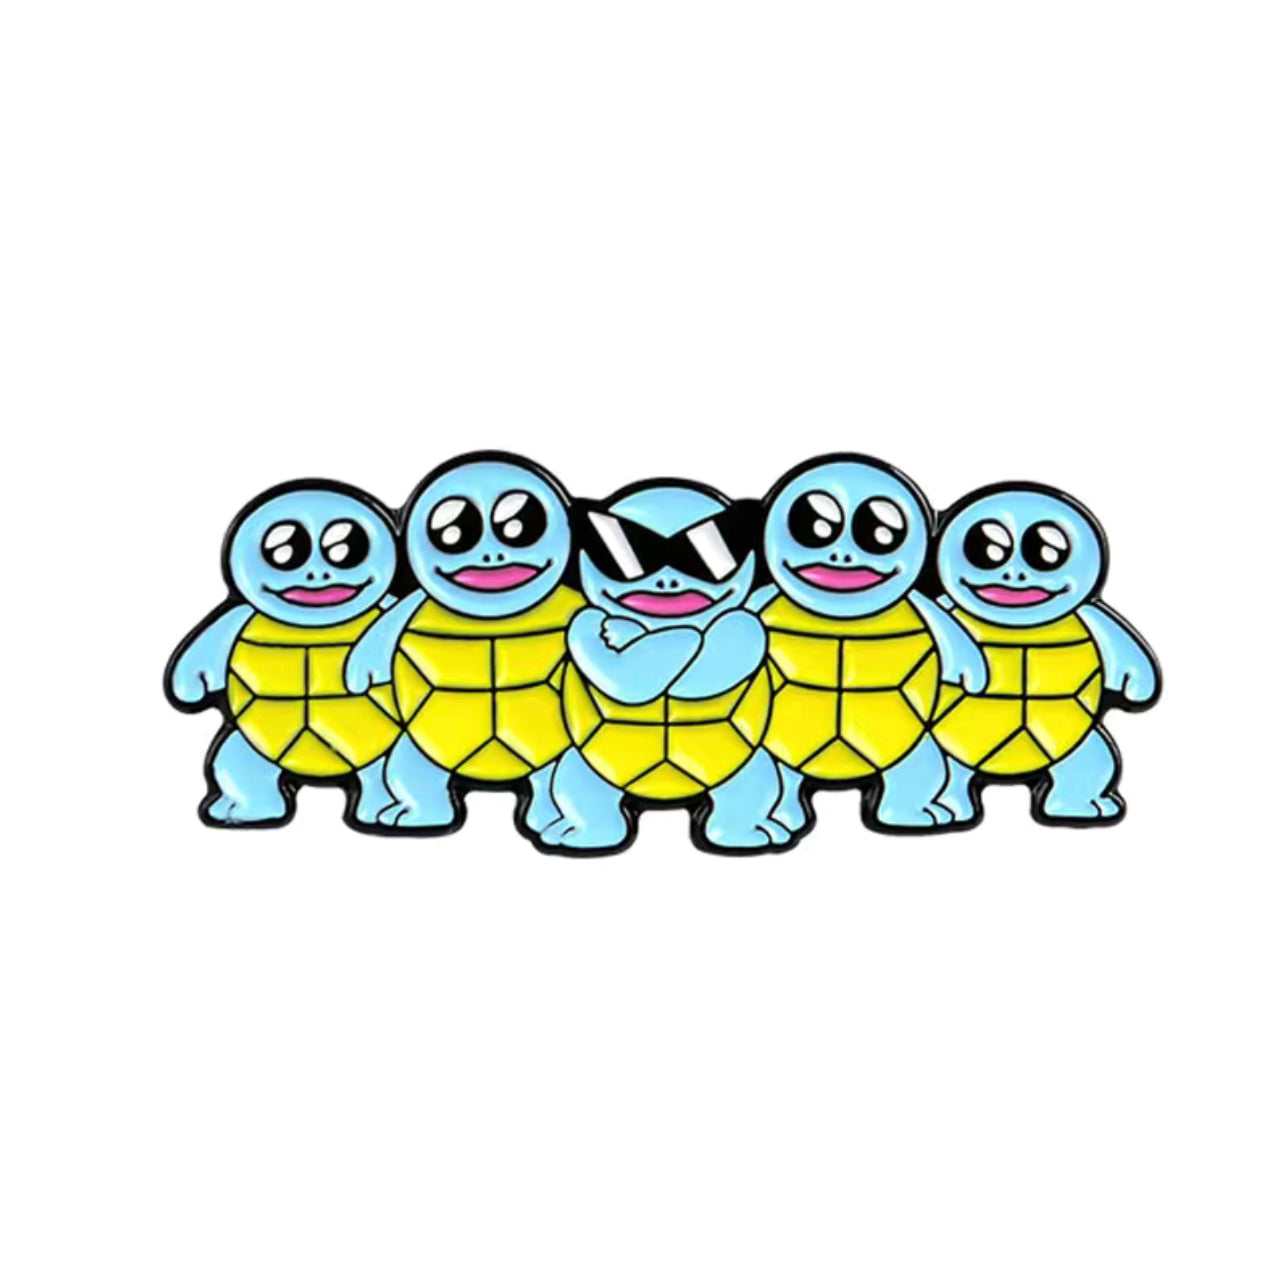 Pokémon Squirtle Squad Pin Badge